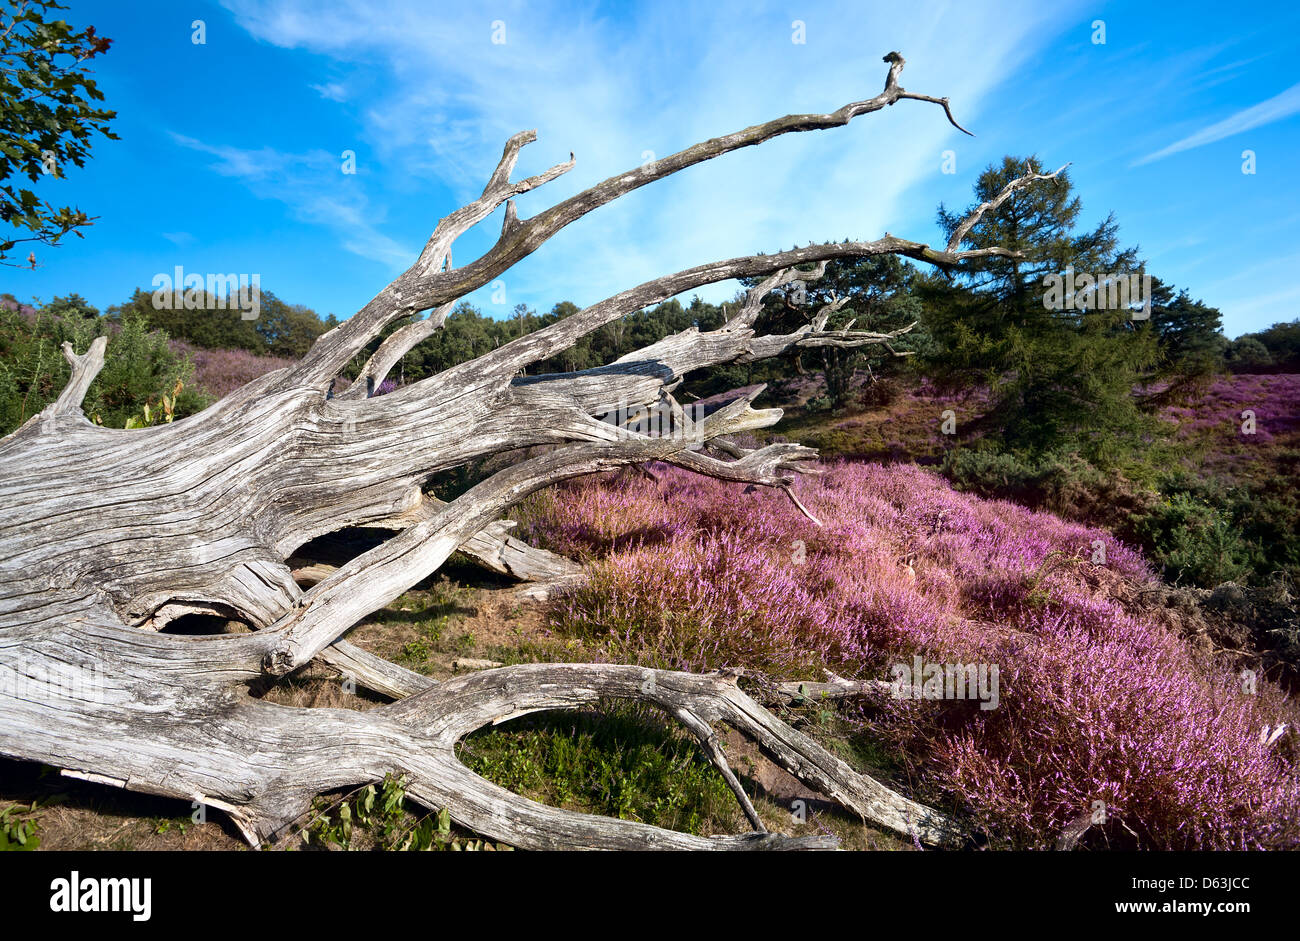 old dry tree among pink flowering heather Stock Photo